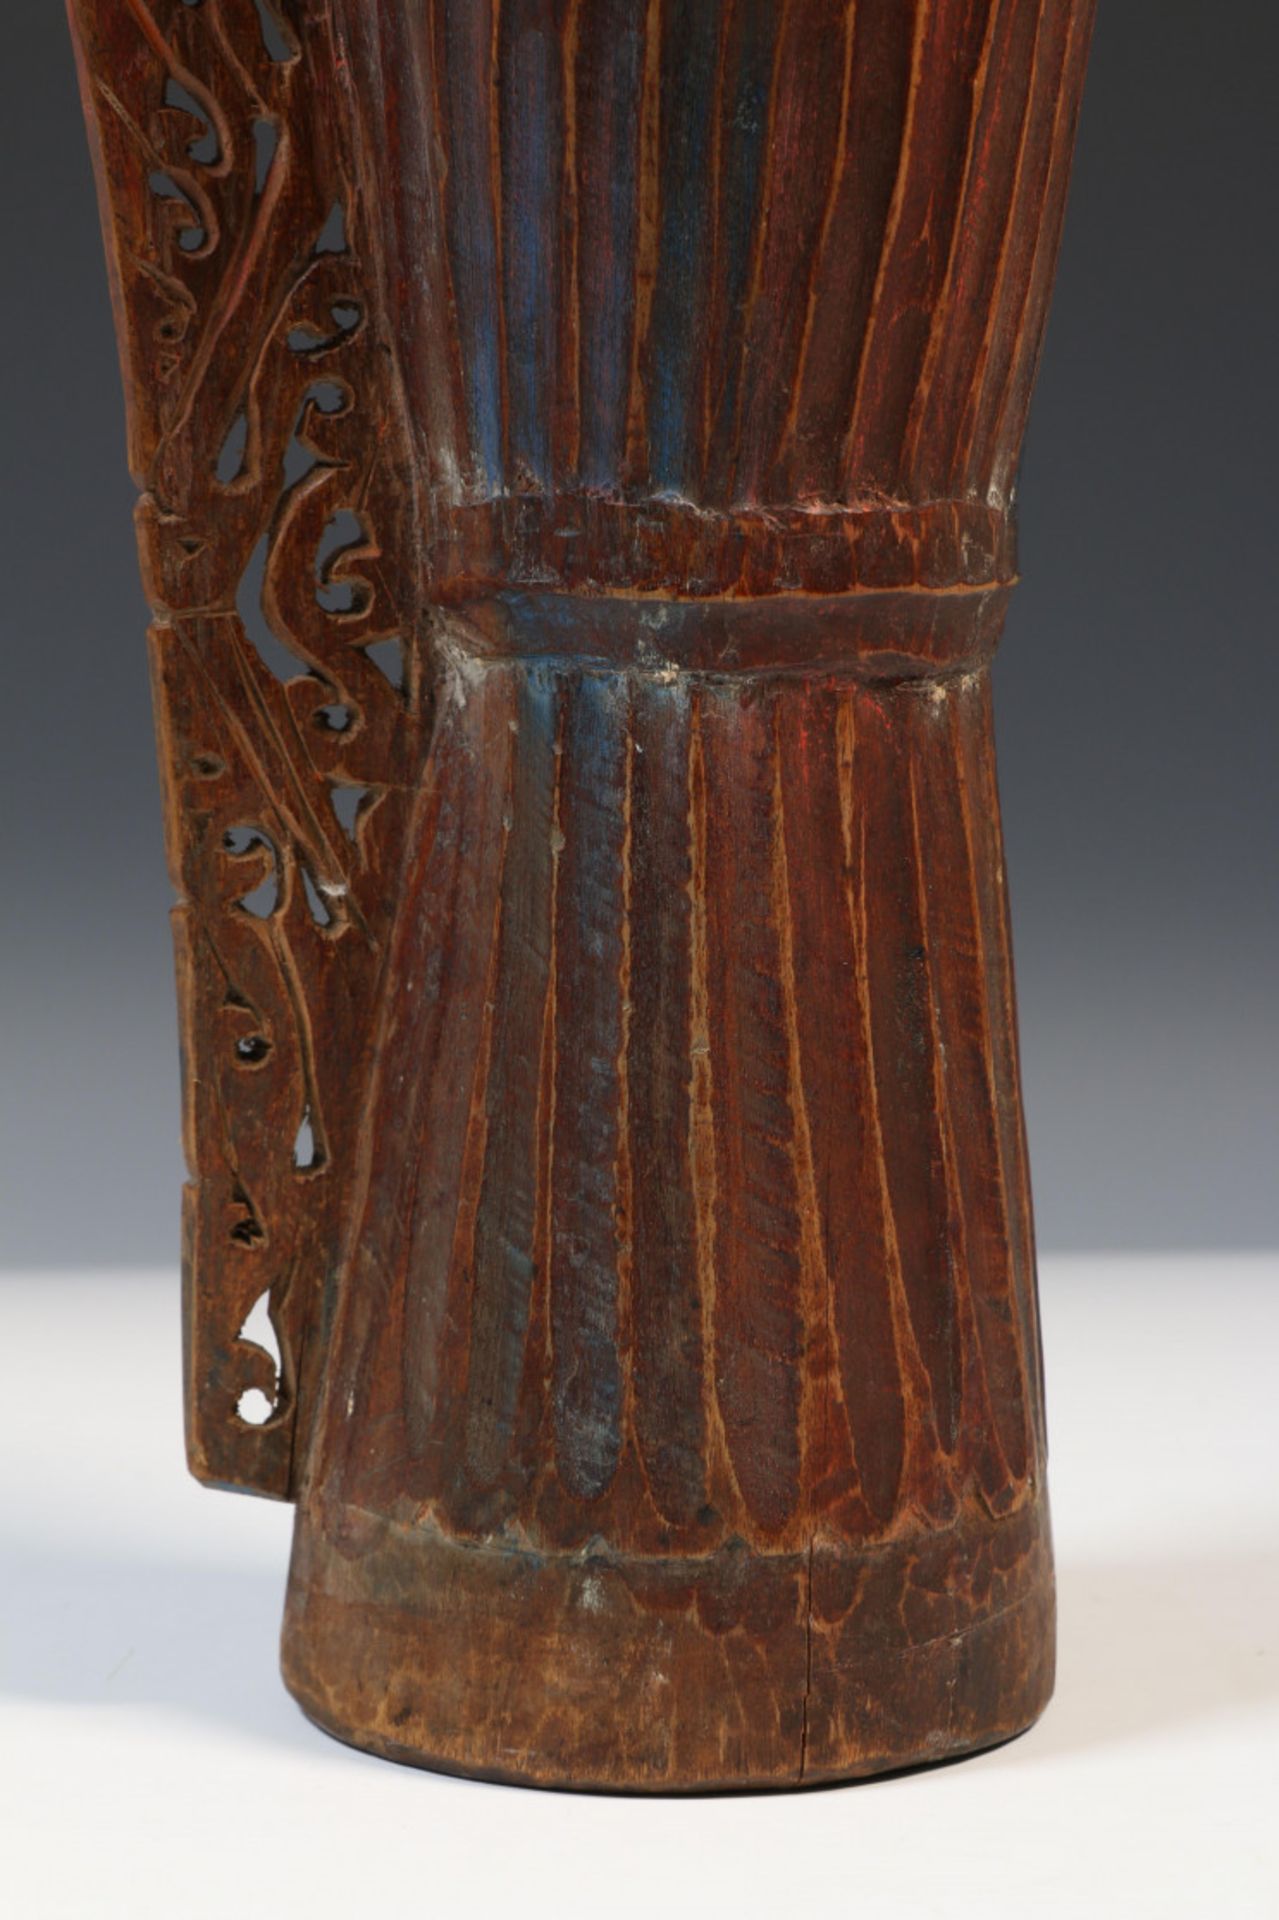 Papua, Cenderawasih Bay, drum, fluted, the handle on lower part openworked, tympanum missing - Image 5 of 7